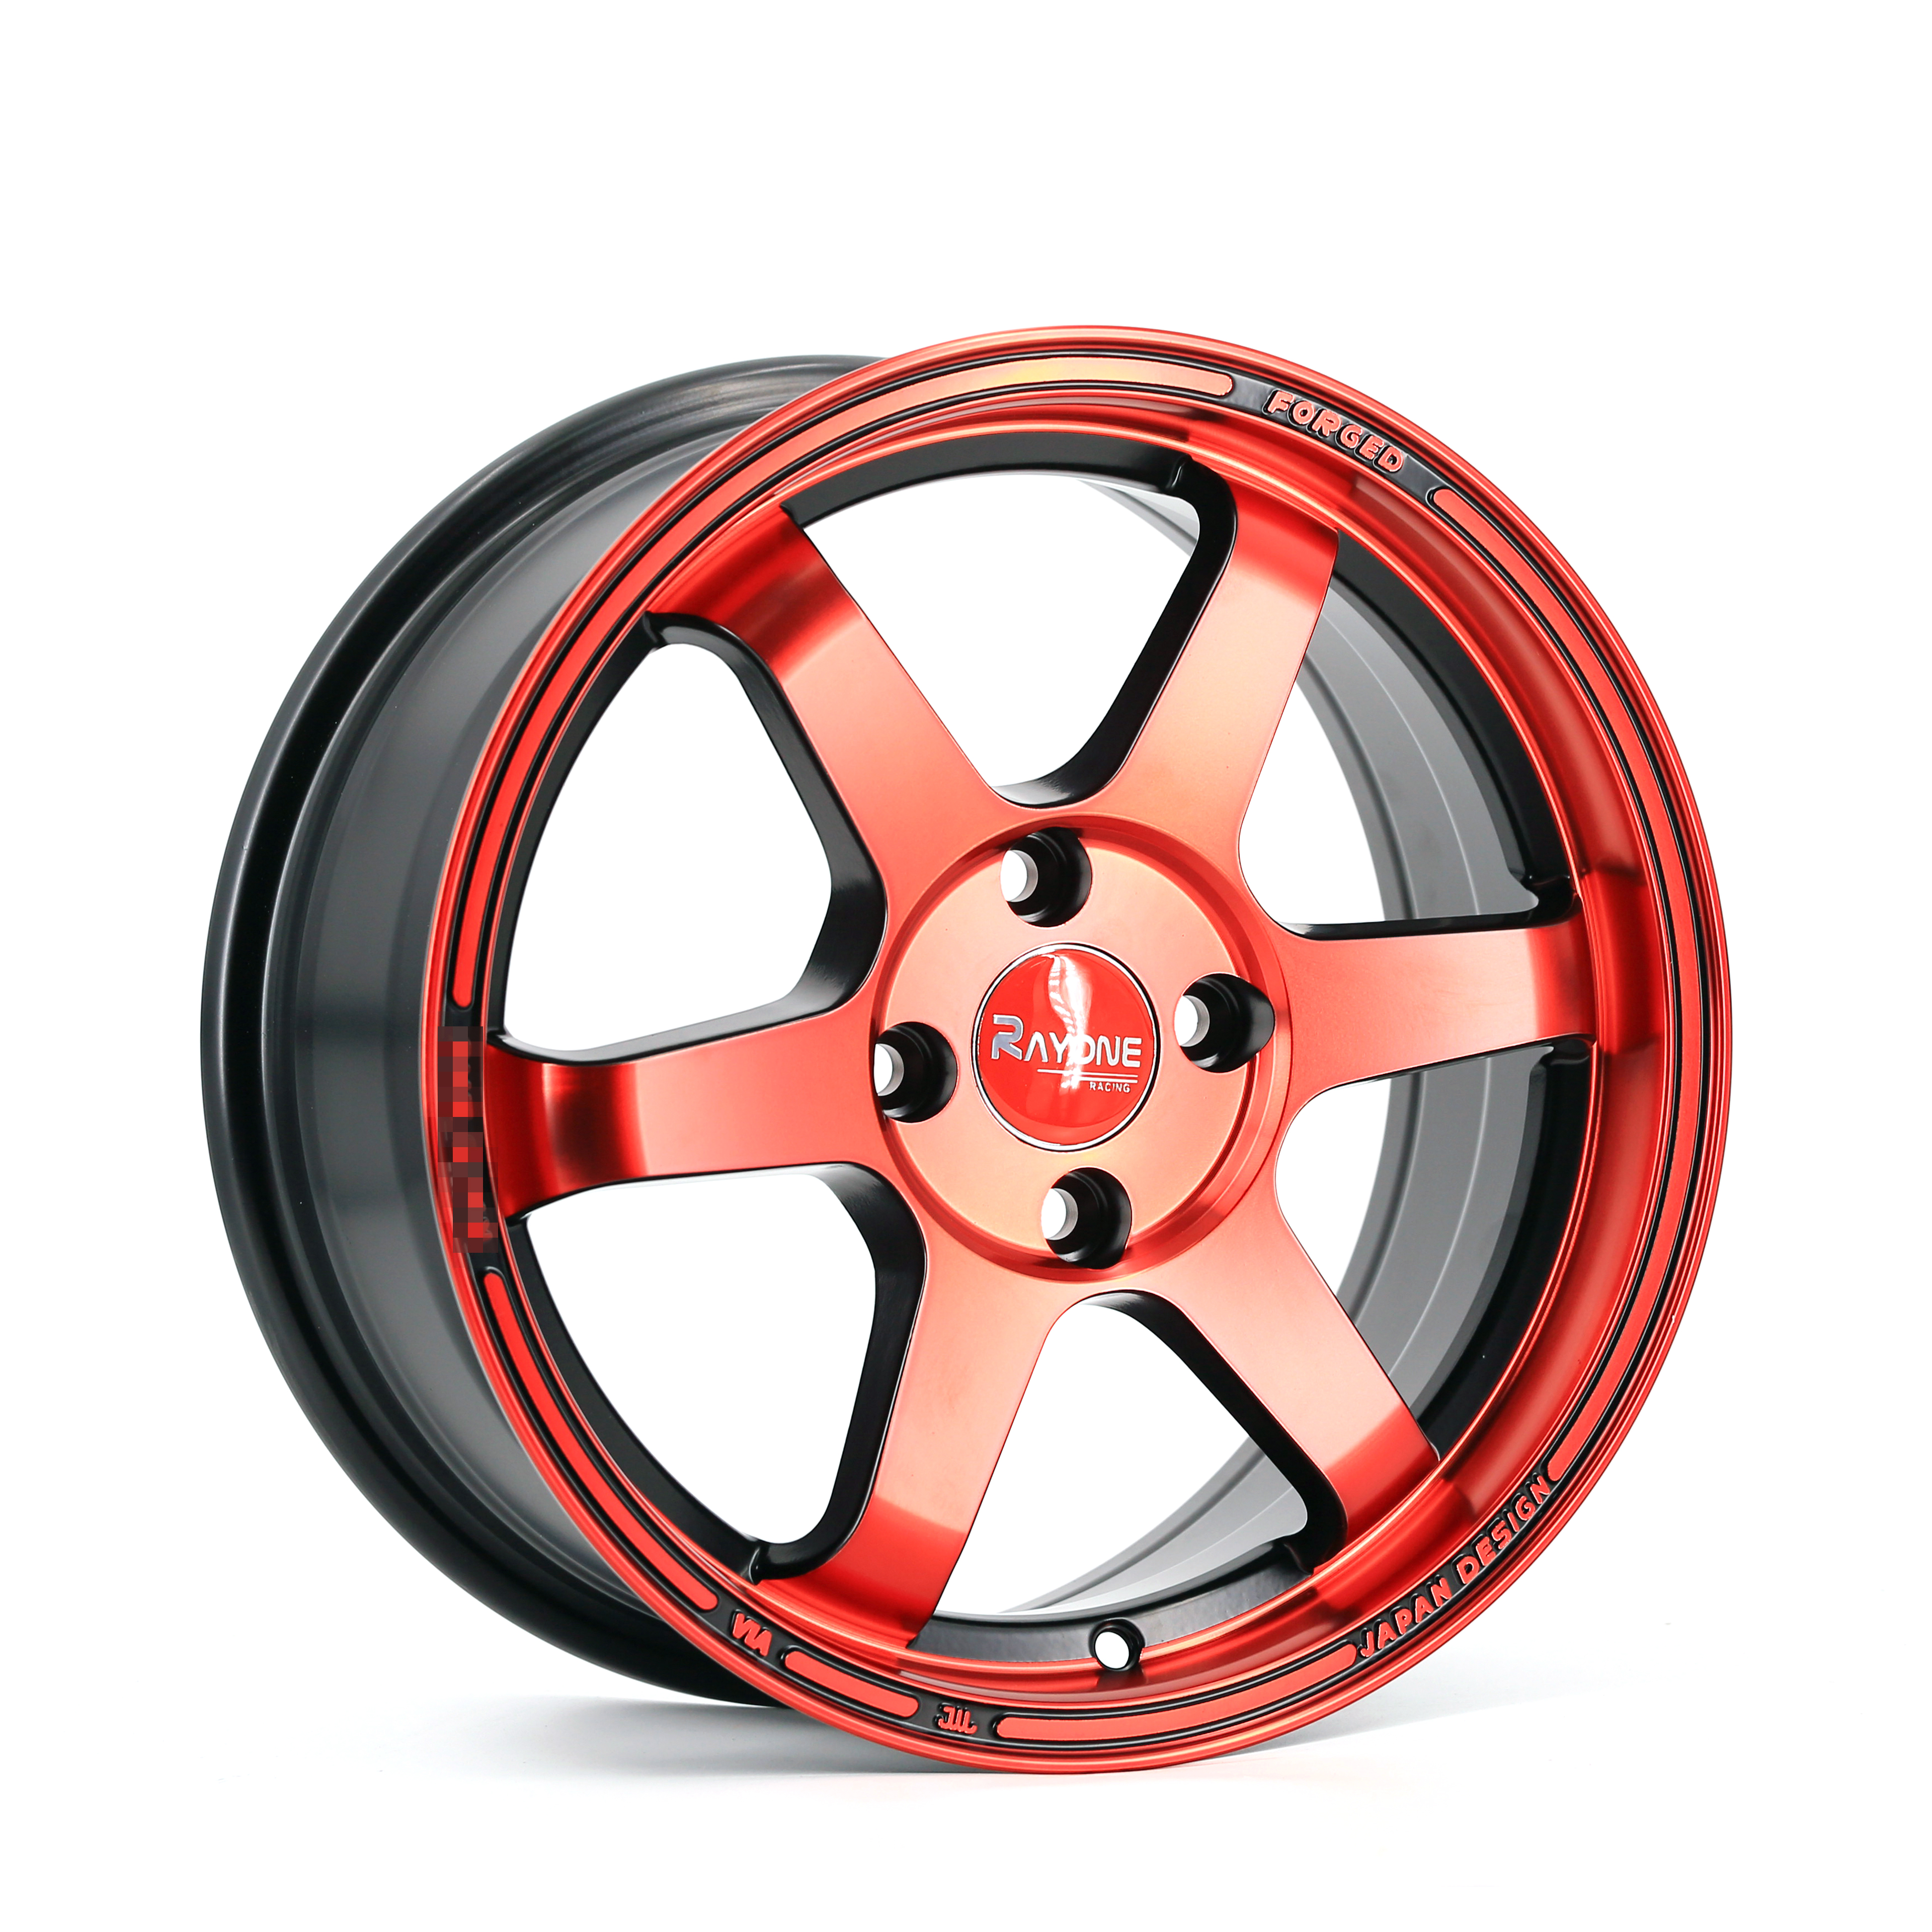 Competitive Price for 13 Alloy Wheels - Car Wheels Wholesale 15×6.5 4×100 Alloy Wheels For Racing Car – Rayone